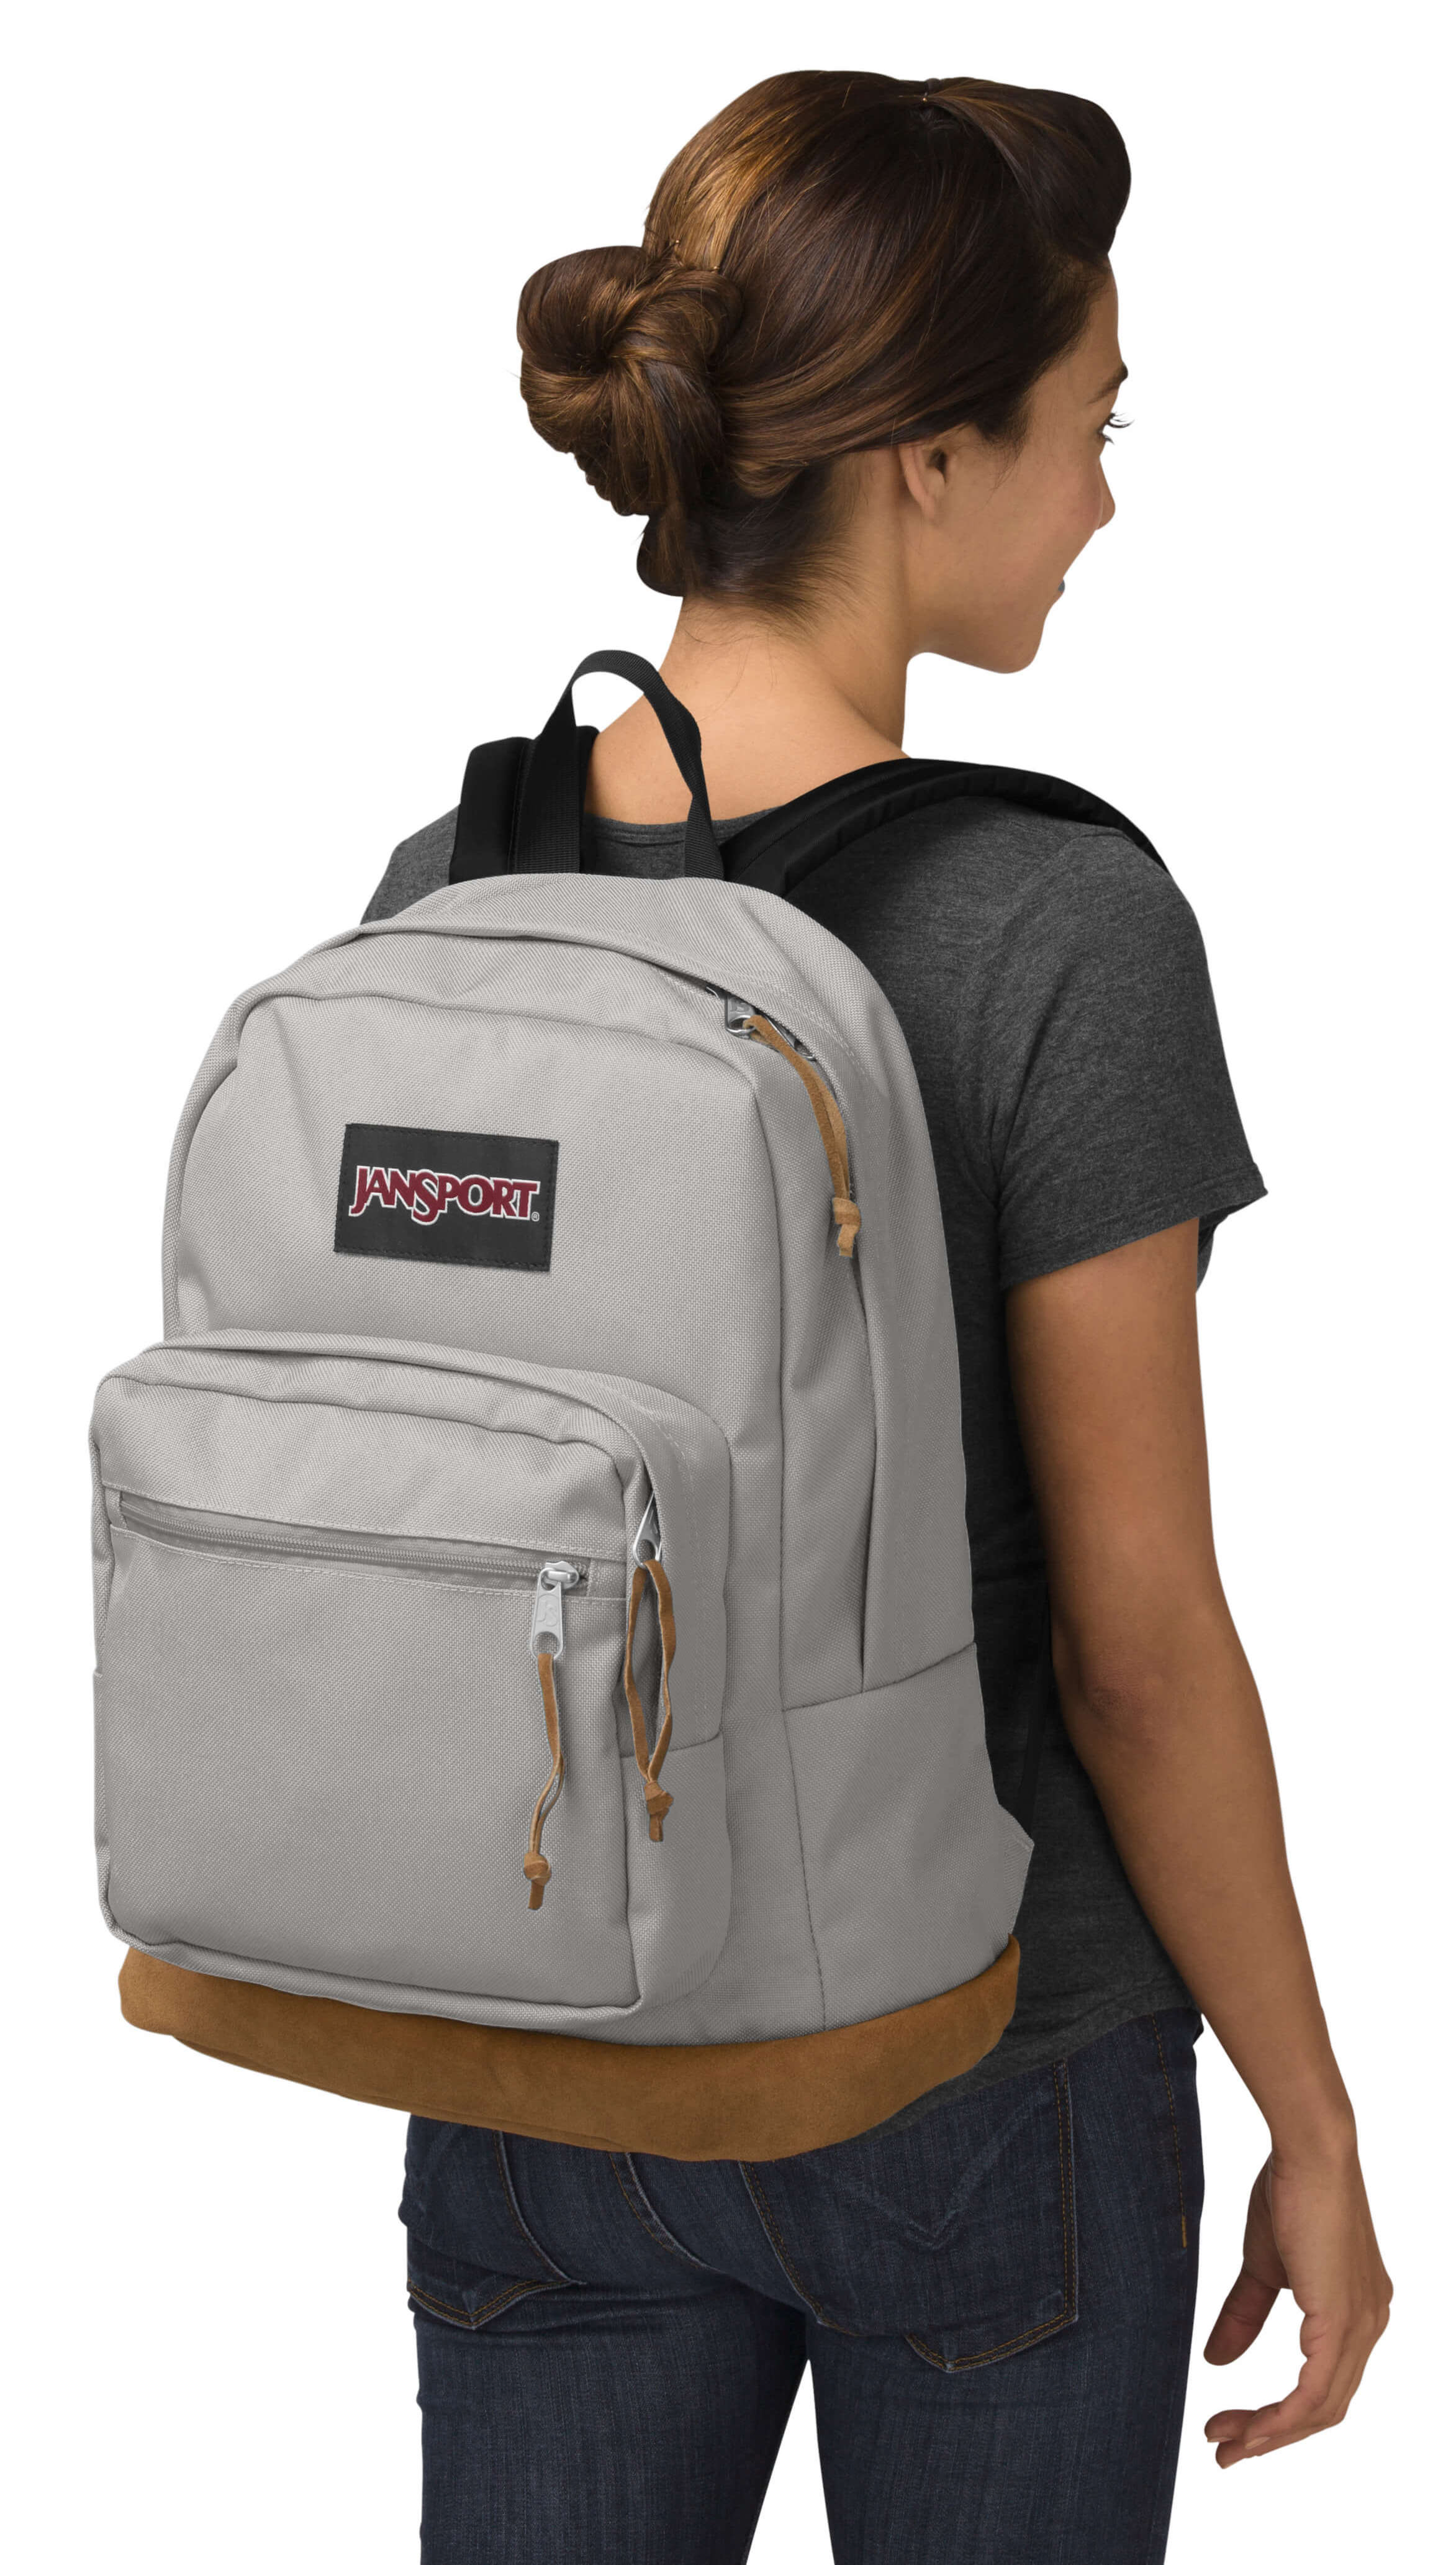 Buy Jansport Right Pack Backpack Grey Rabbit from Canada at www.bagsaleusa.com - Free Shipping